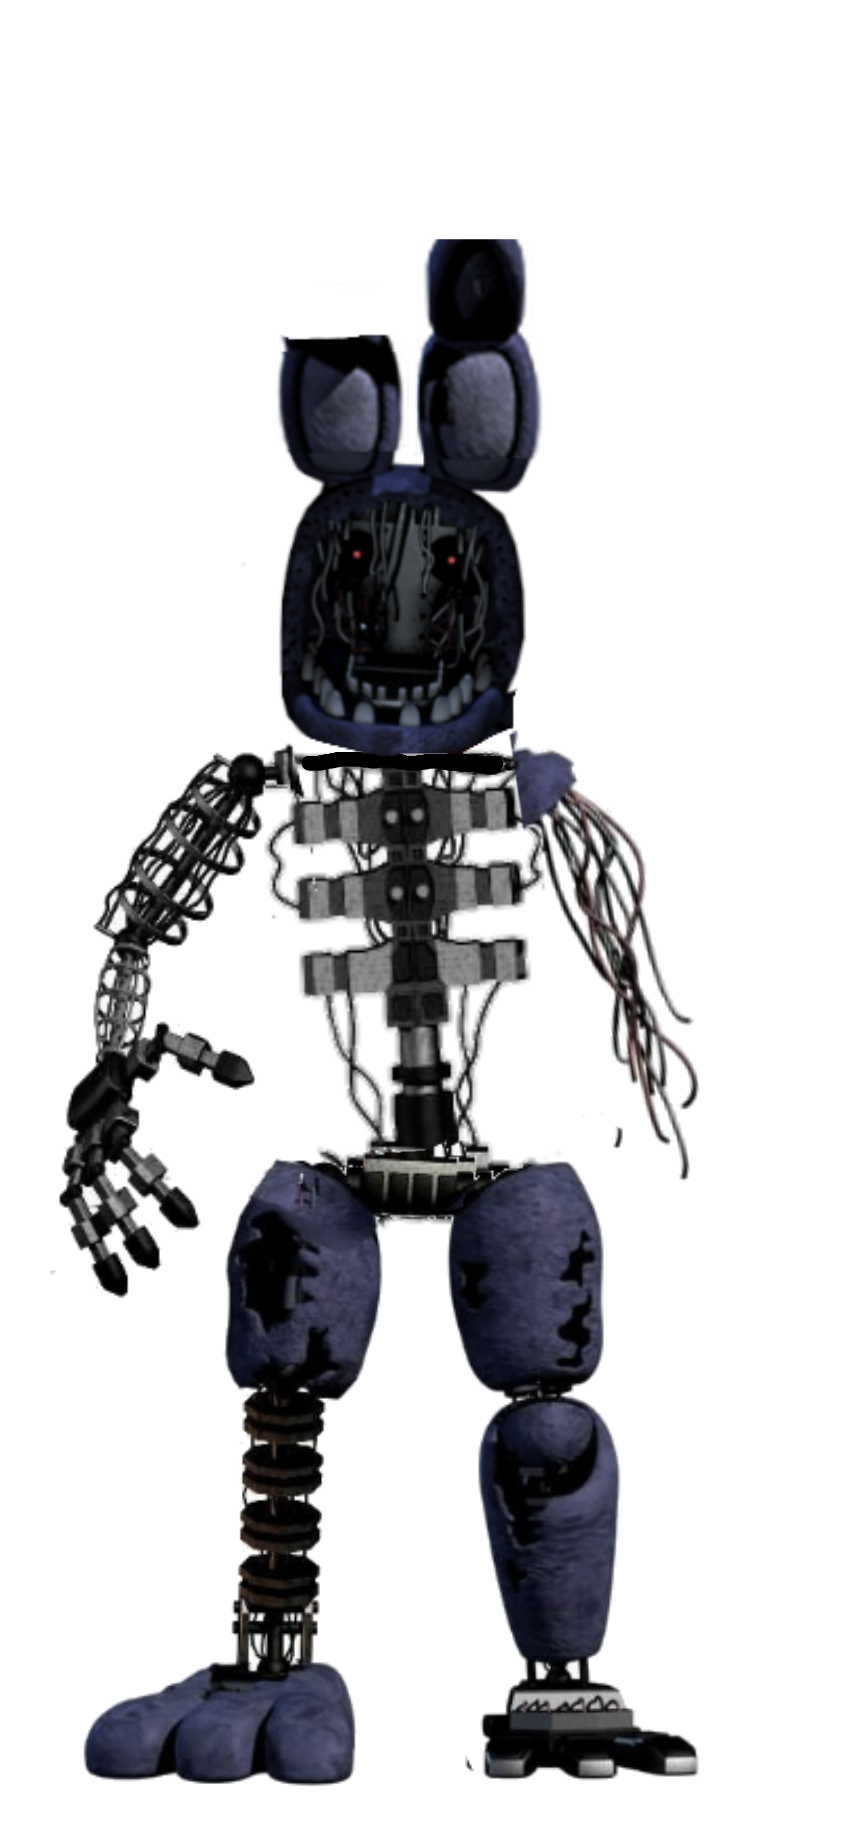 Ignited Bonnie(FNAF WORLD) by SonicUniverseArt on DeviantArt